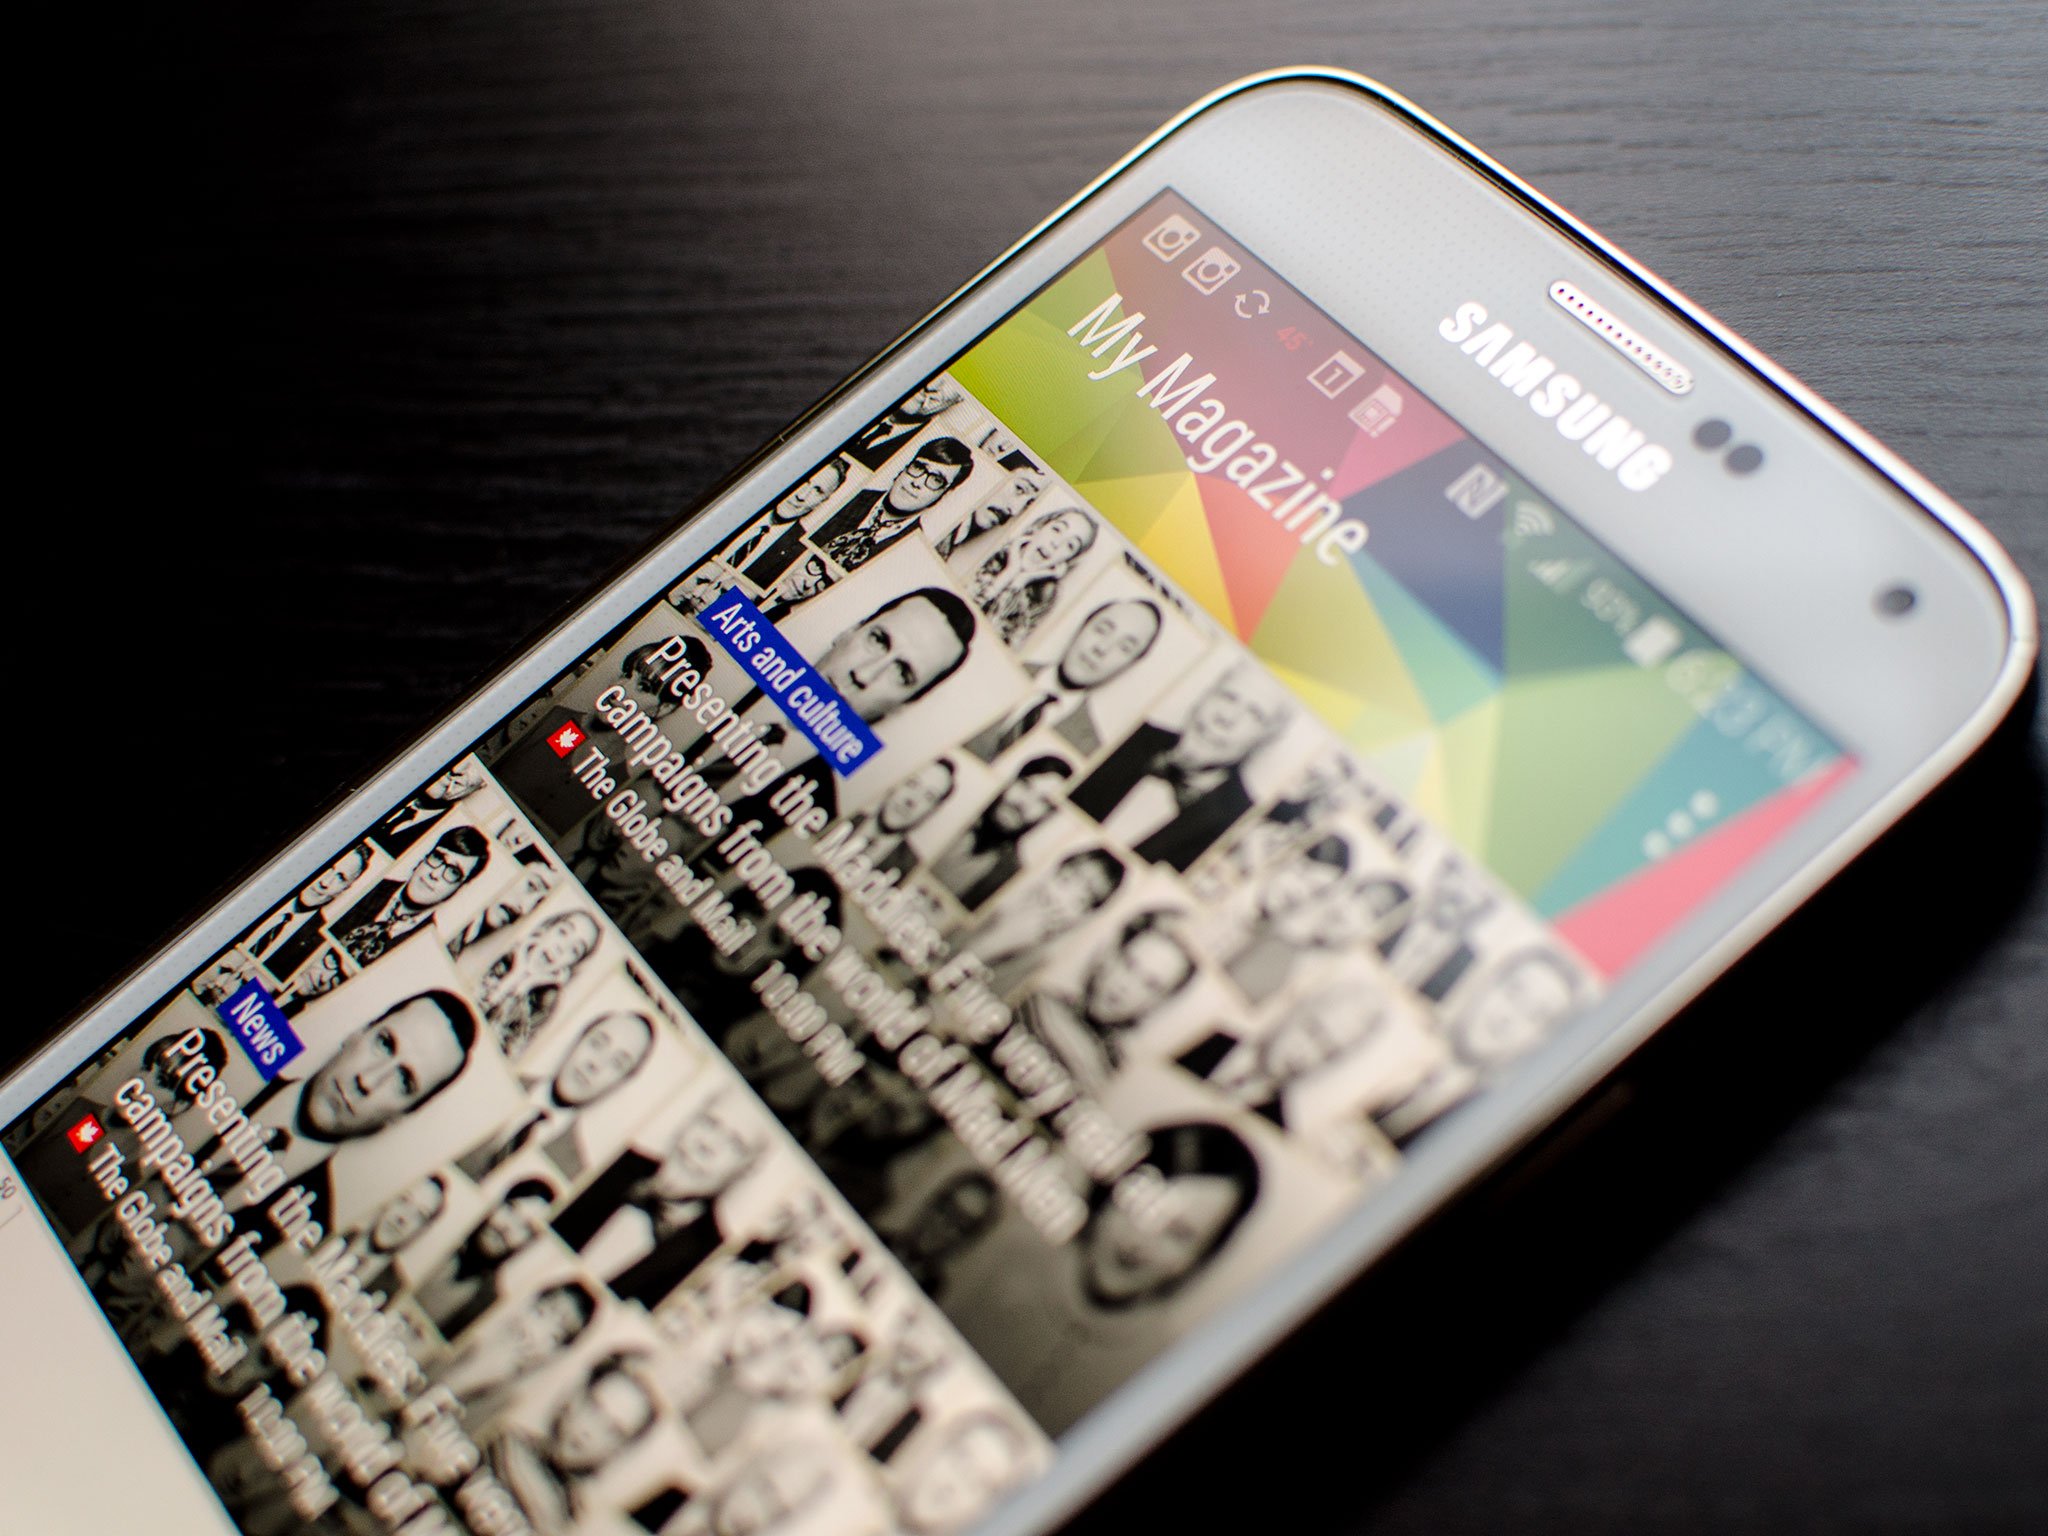 How to disable My Magazine on the Samsung Galaxy S5